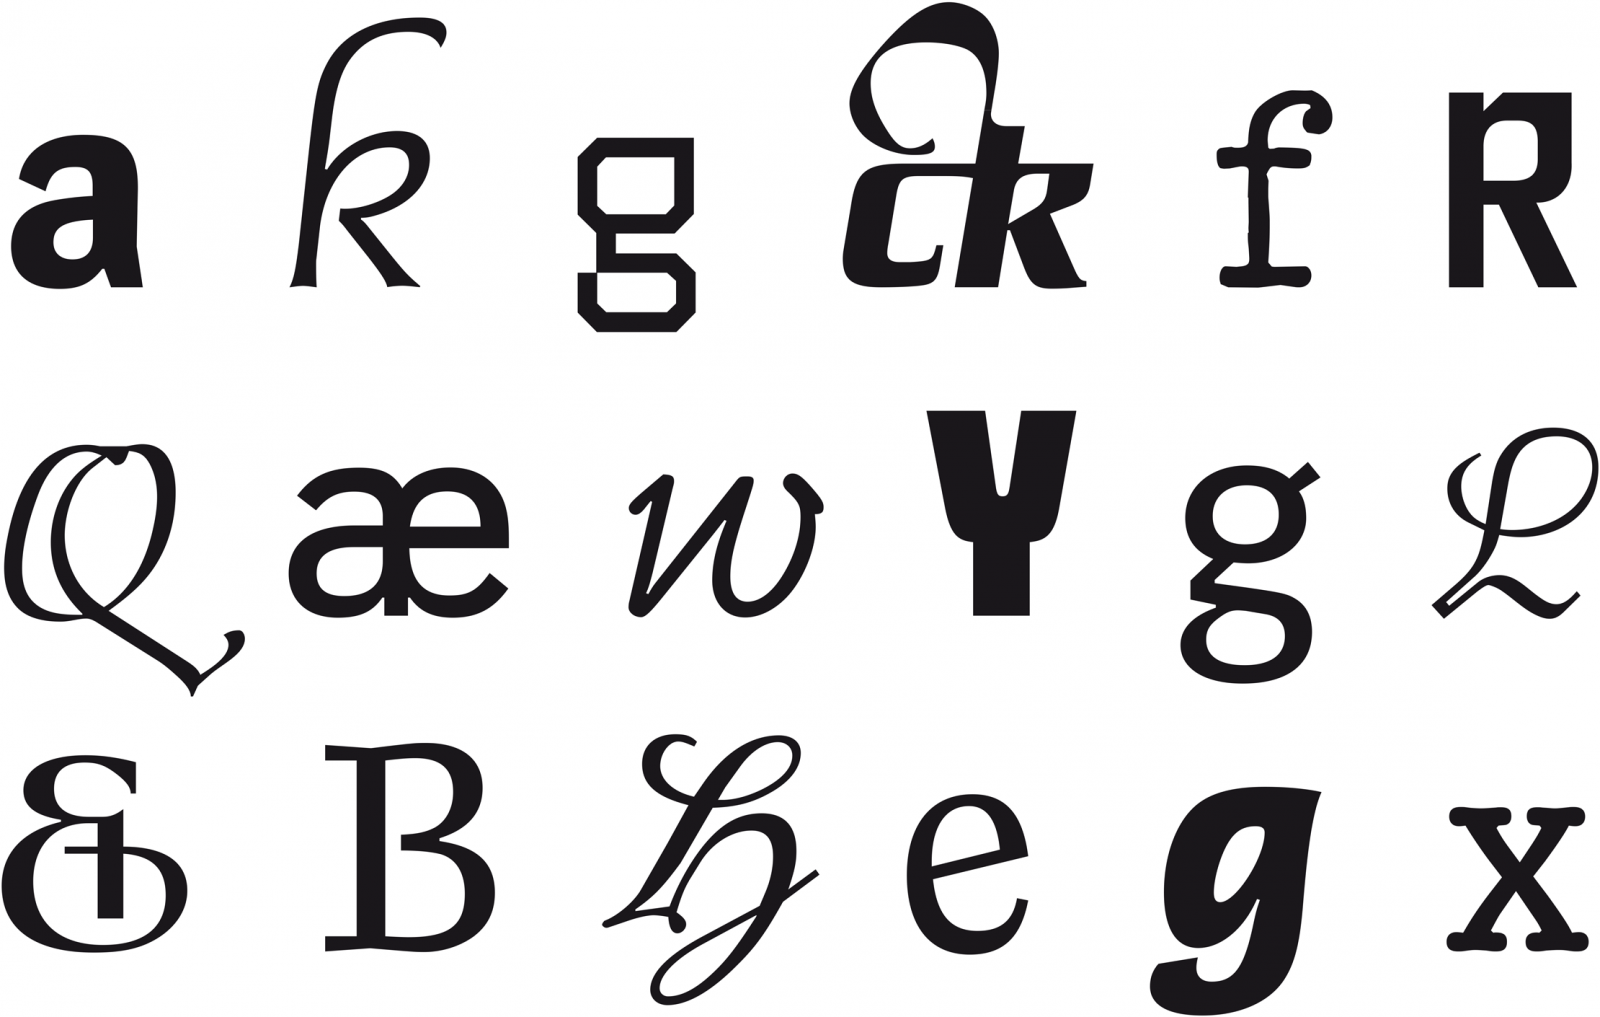 More information about "The typefaces of Georg Salden"